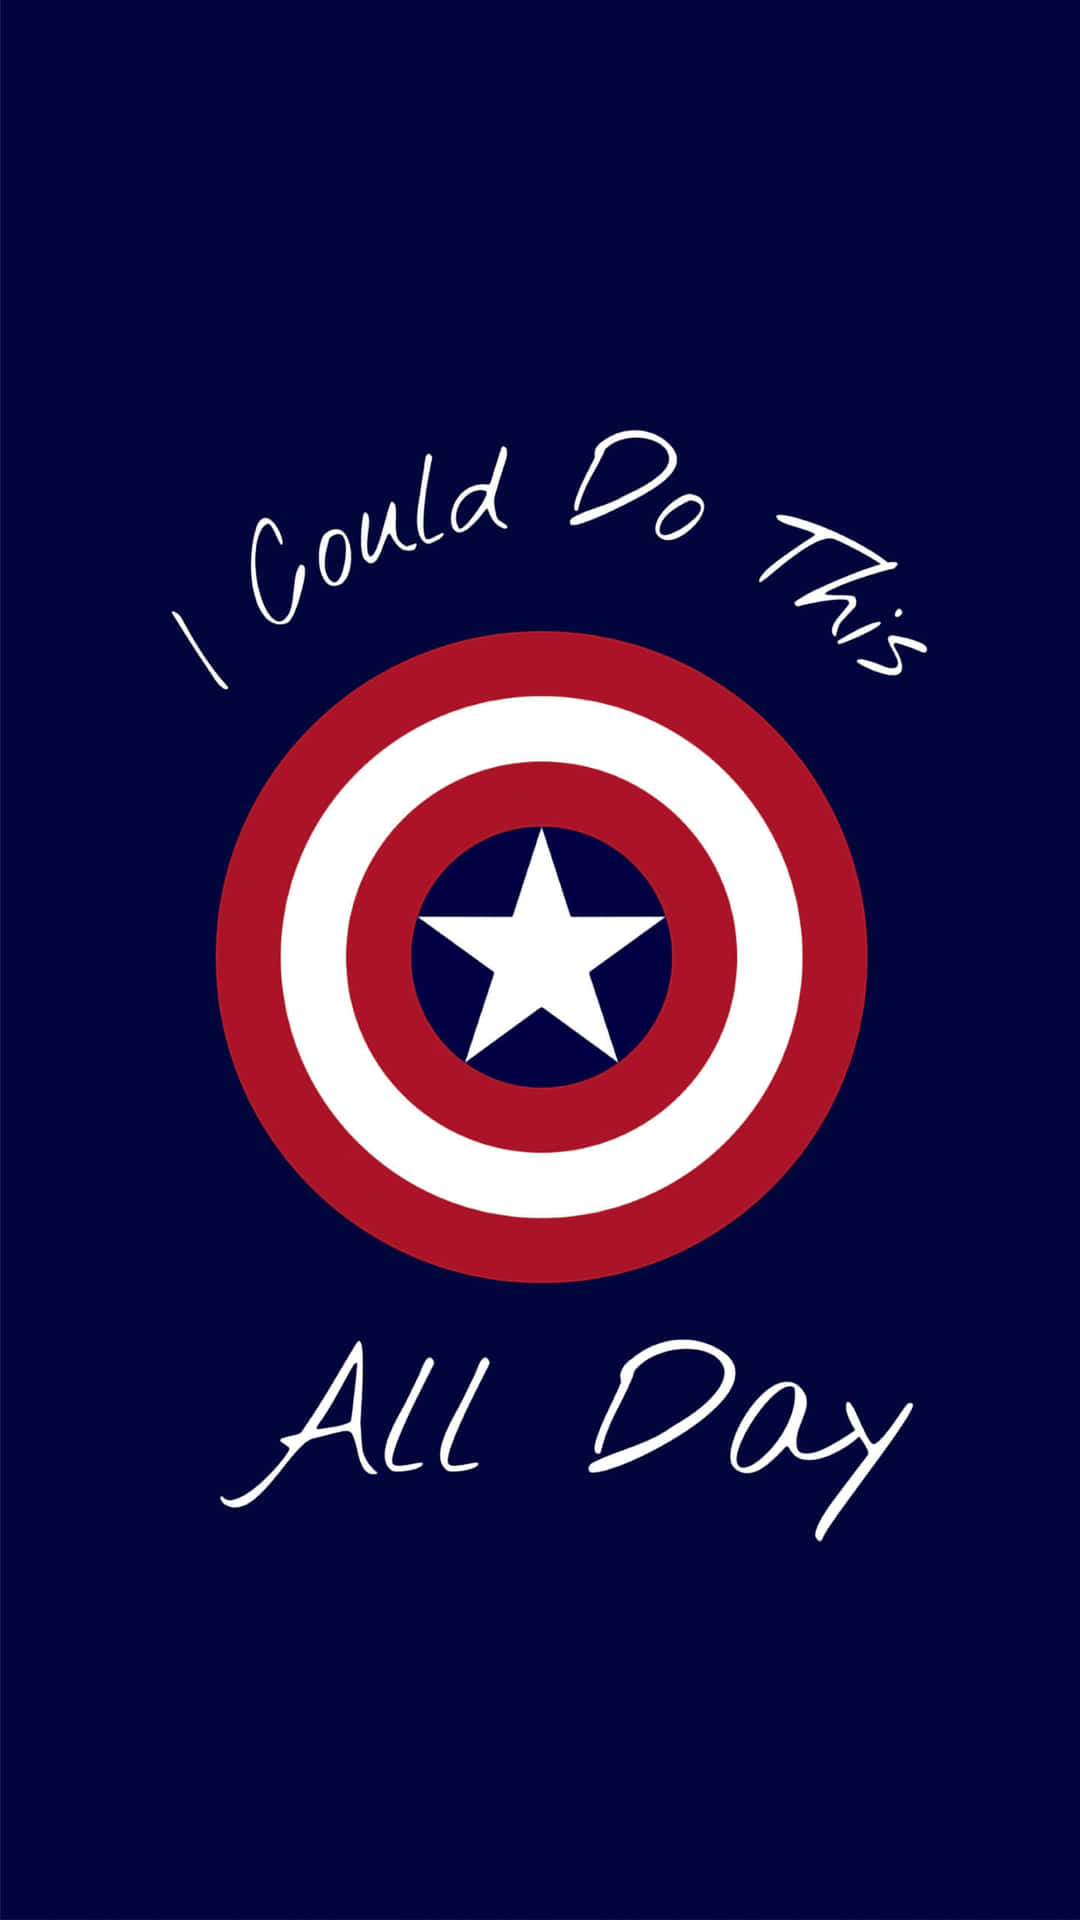 Feel cool and empowered with Captain America! Wallpaper